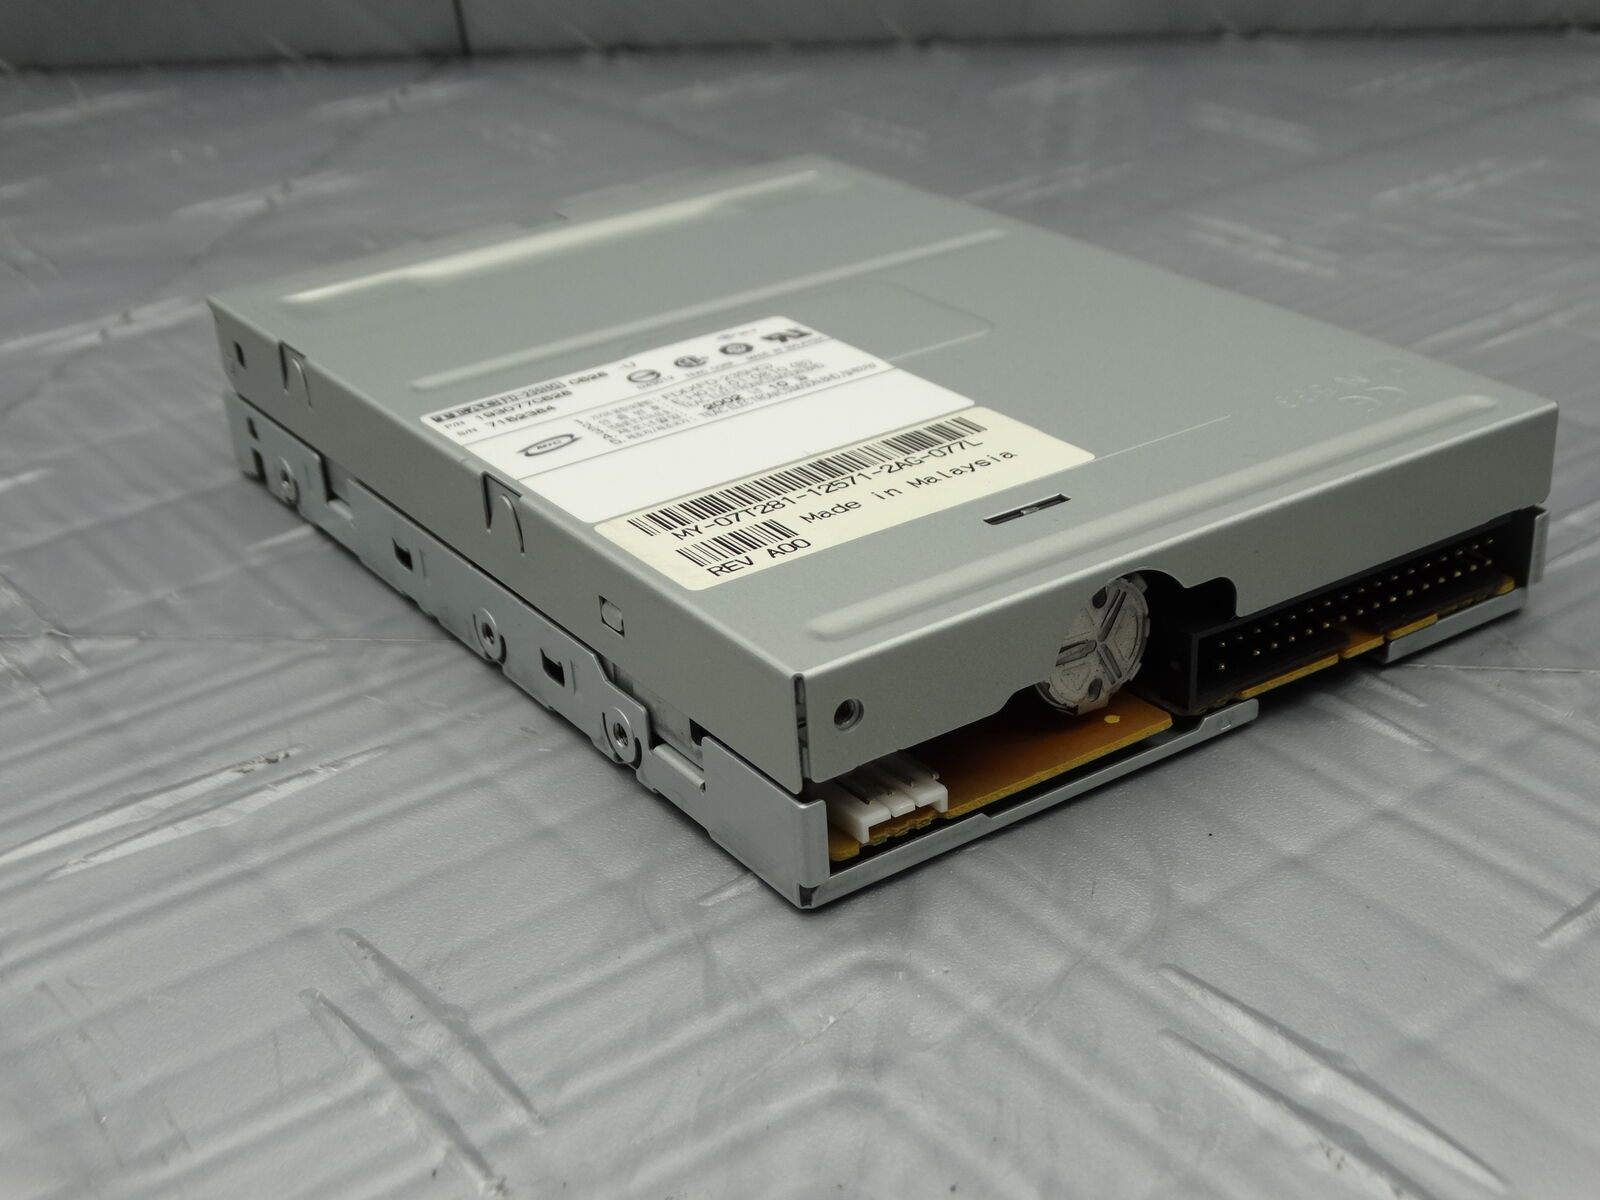 TEAC FD-235HG Internal Floppy Disk Drive 193077C628 Made in Malaysia